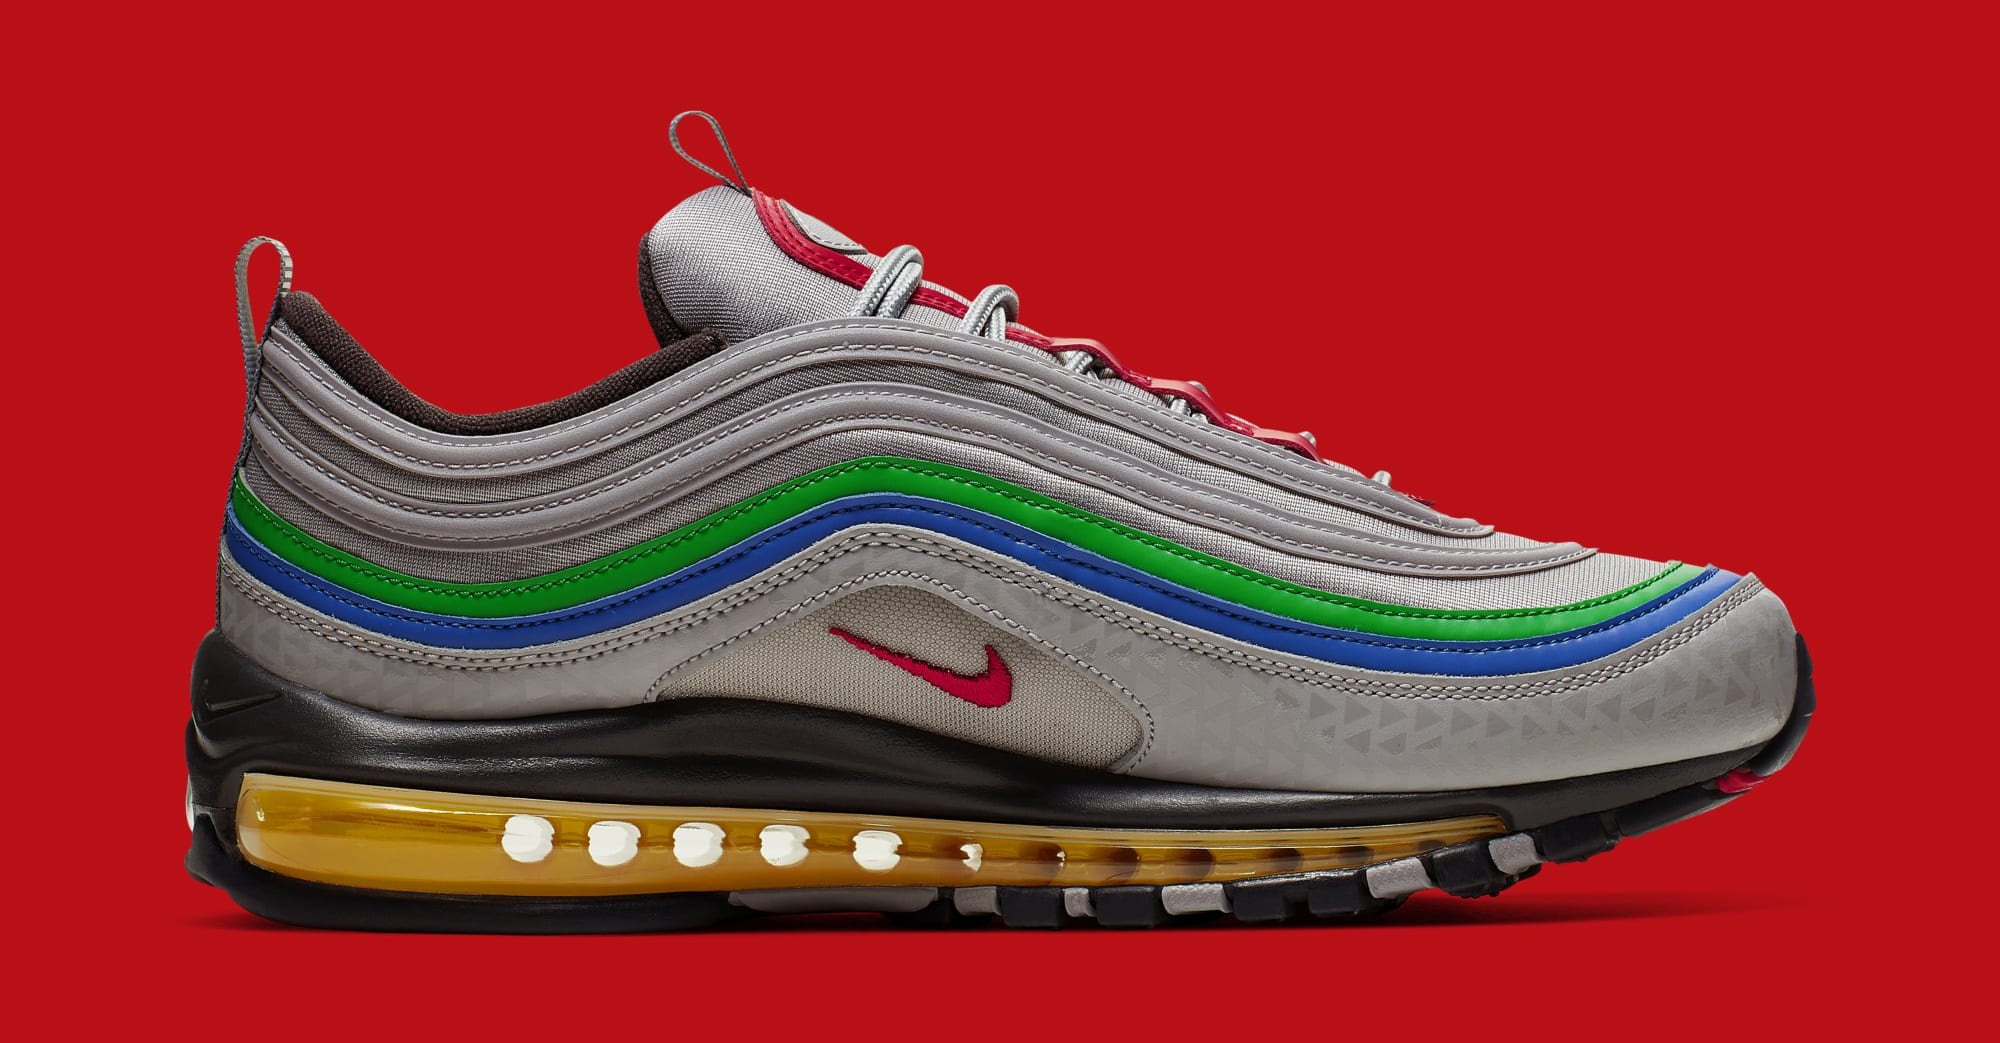 listener cliff See through Nike Air Max 97 'Nintendo 64' CI5012-001 Release Date | Sole Collector